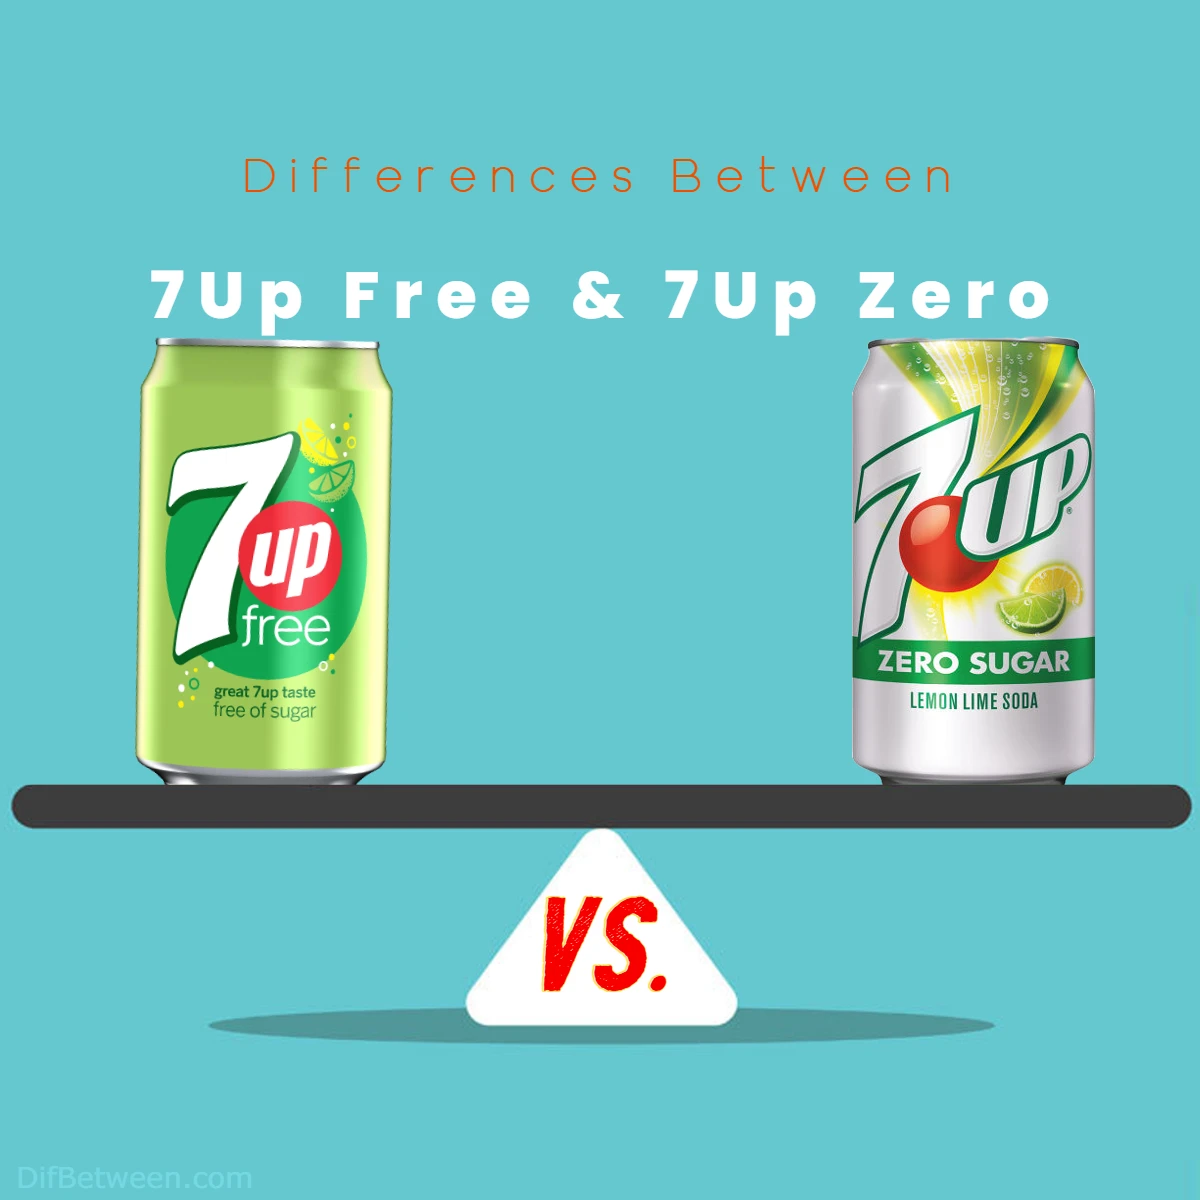 Differences Between 7Up Zero and 7Up Free